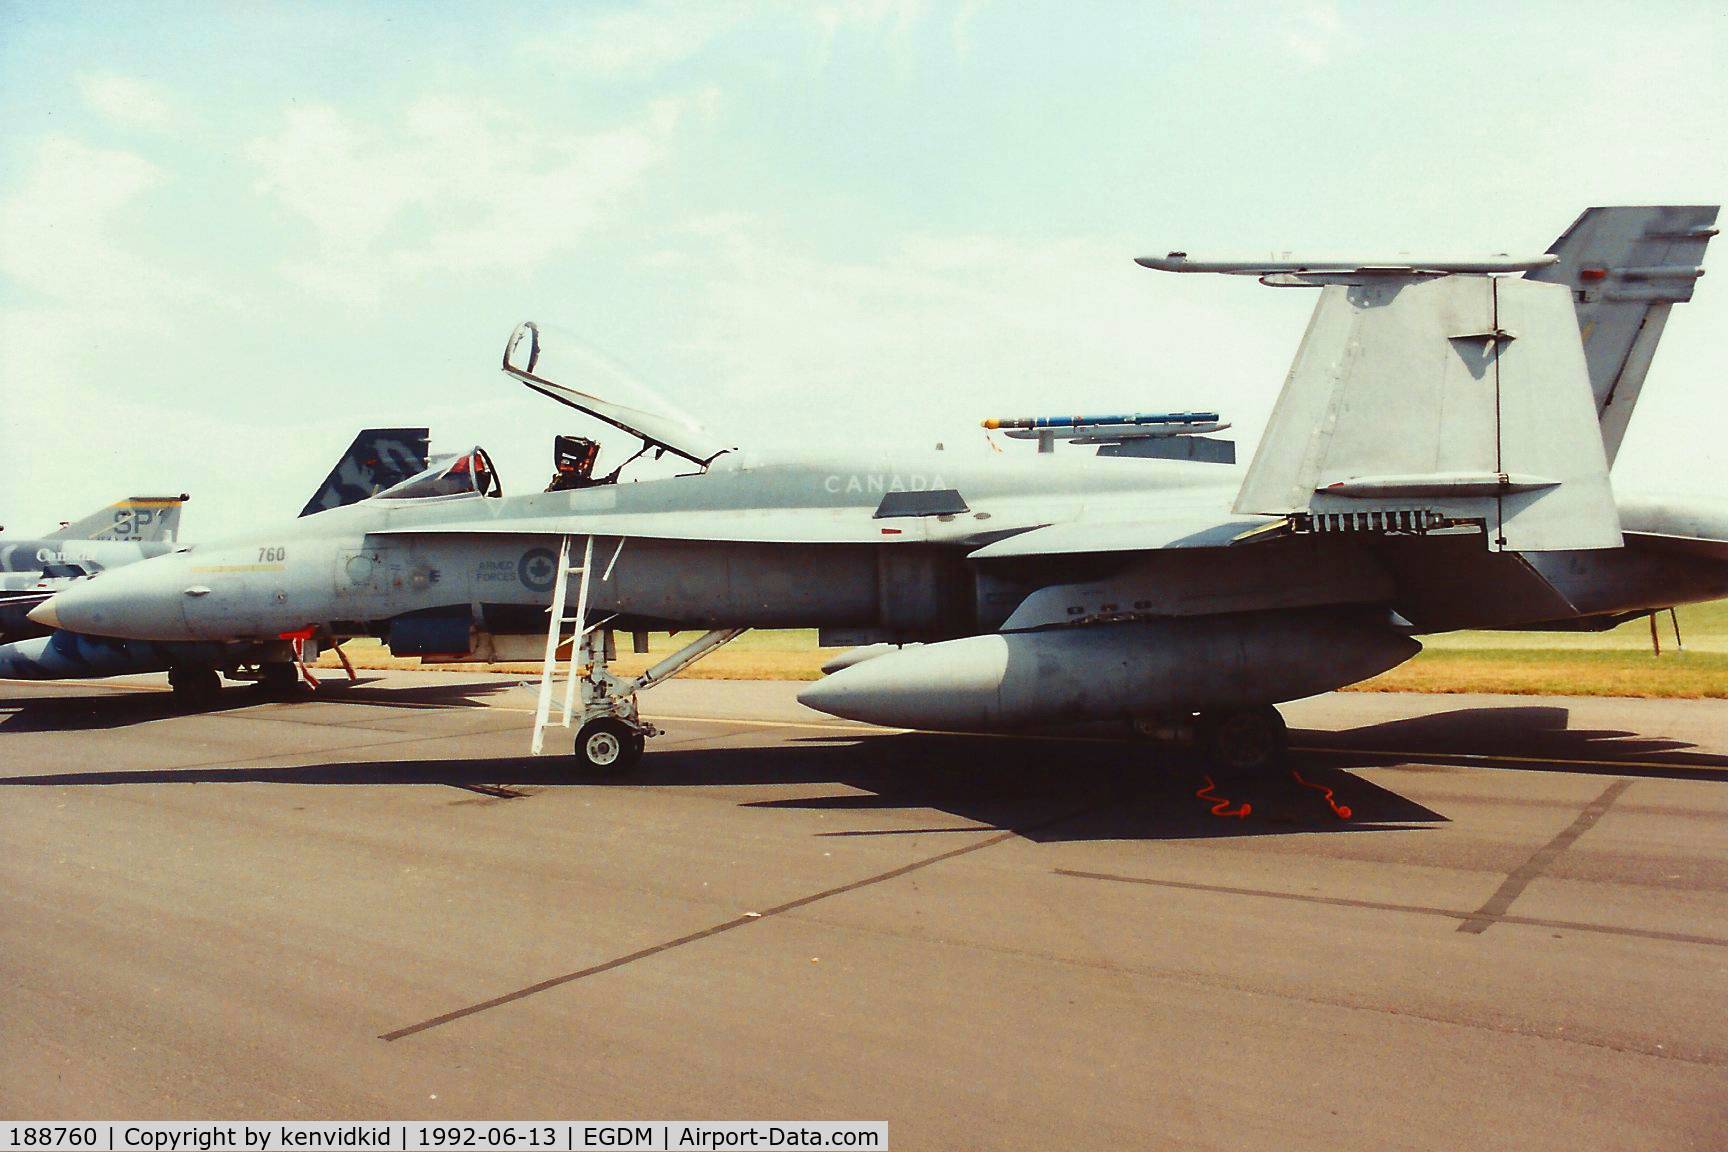 188760, 1986 McDonnell Douglas CF-188A Hornet C/N 0409/A341, At Boscombe Down, scanned from print.